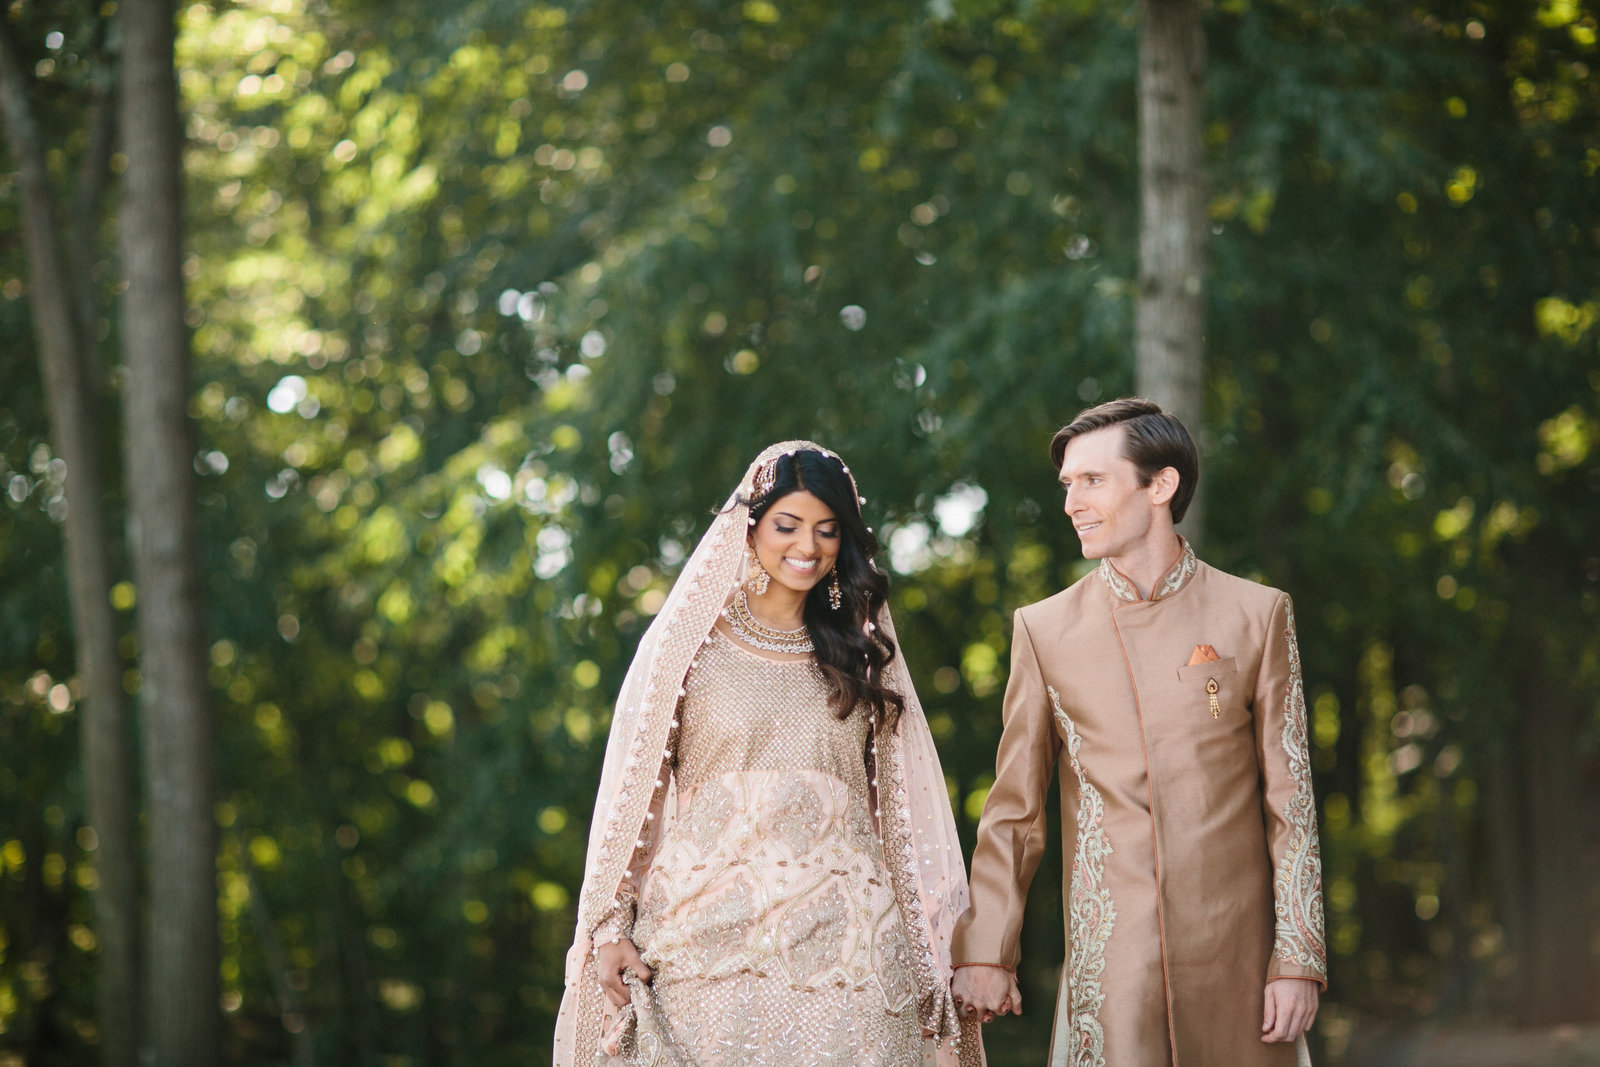 Bride and groom photographed together during the Indian part of their Indian -American wedding celebration.